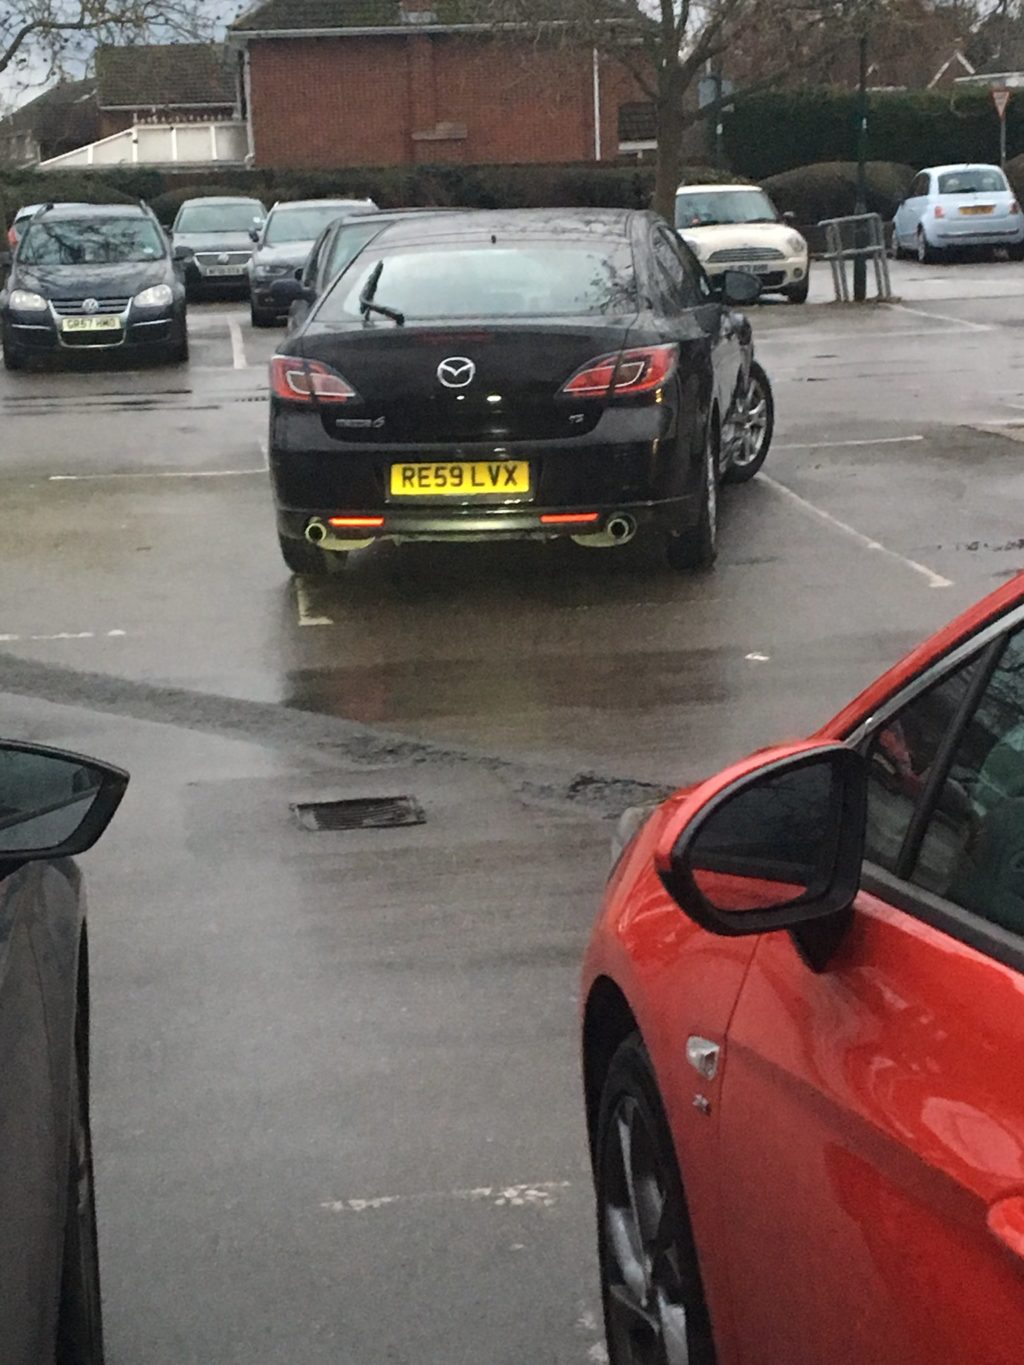 RE59 LVX is an Inconsiderate Parker